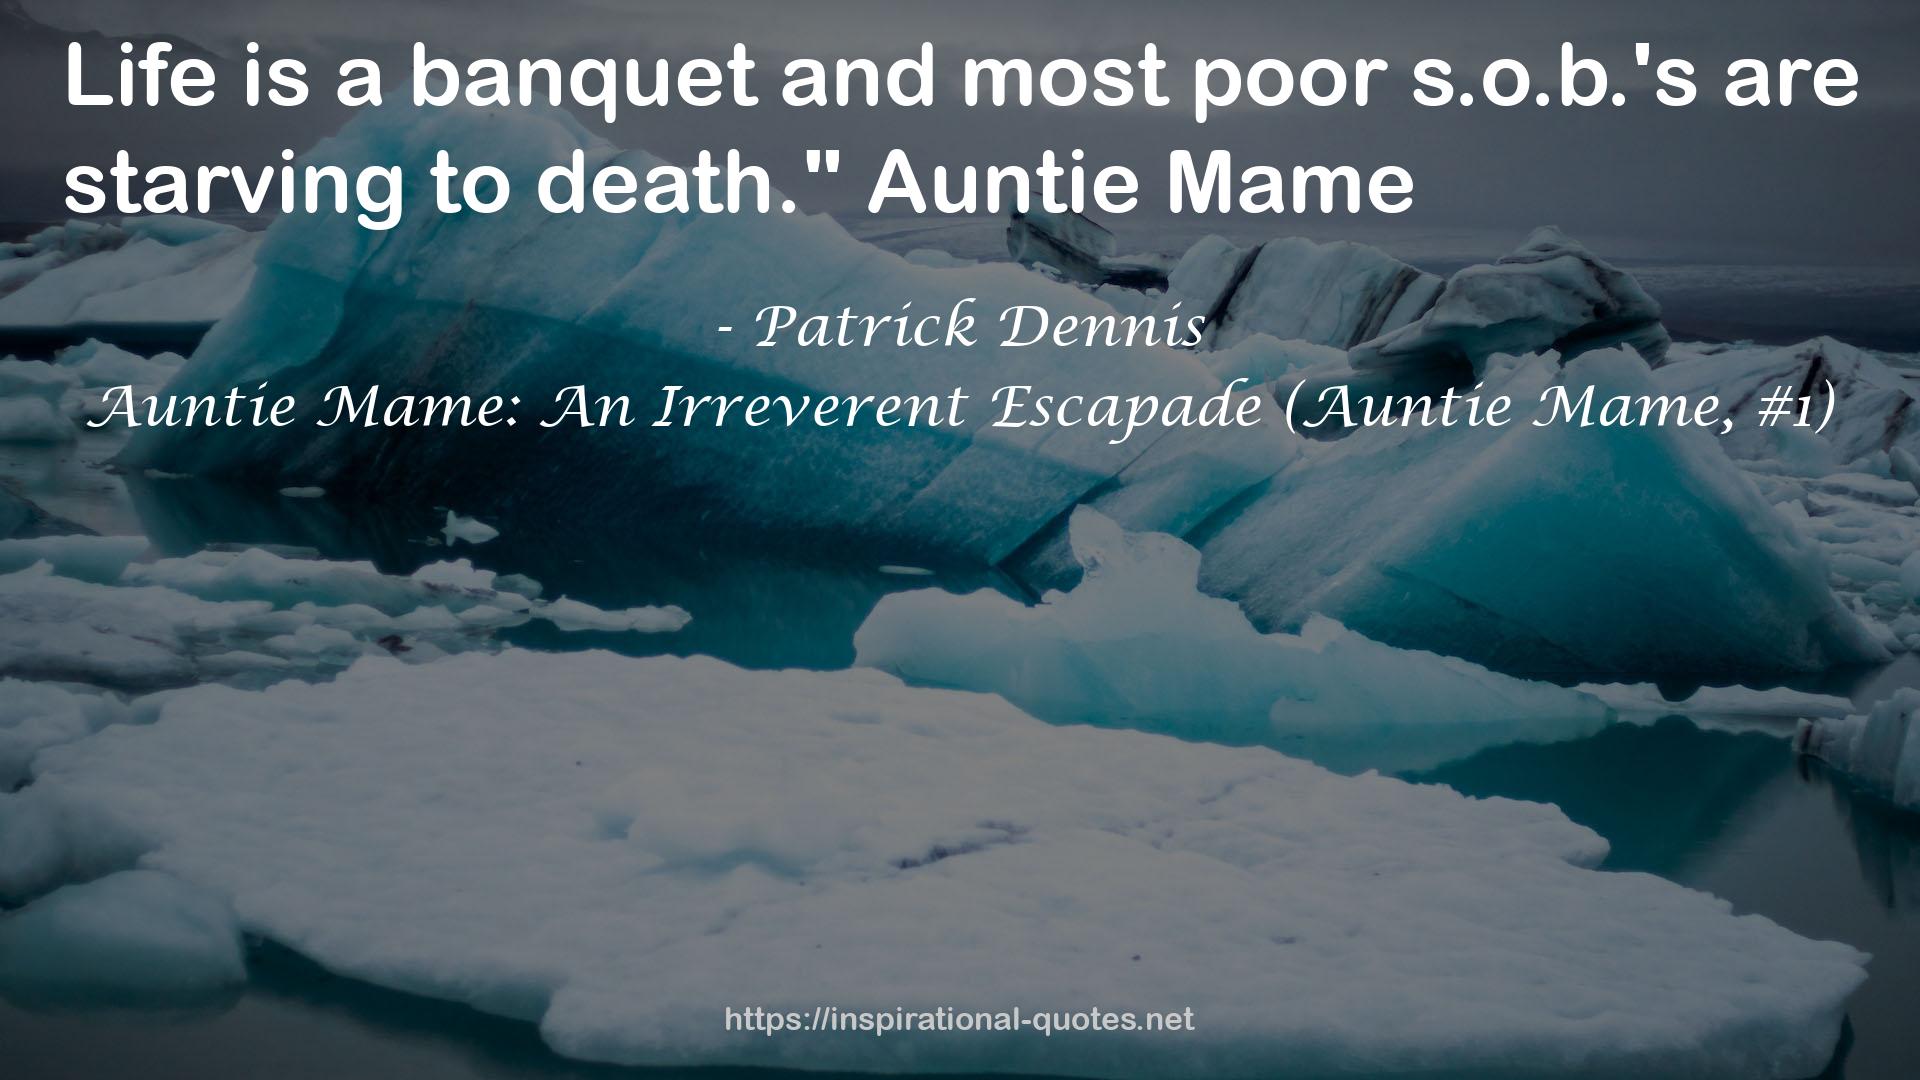 Auntie Mame: An Irreverent Escapade (Auntie Mame, #1) QUOTES